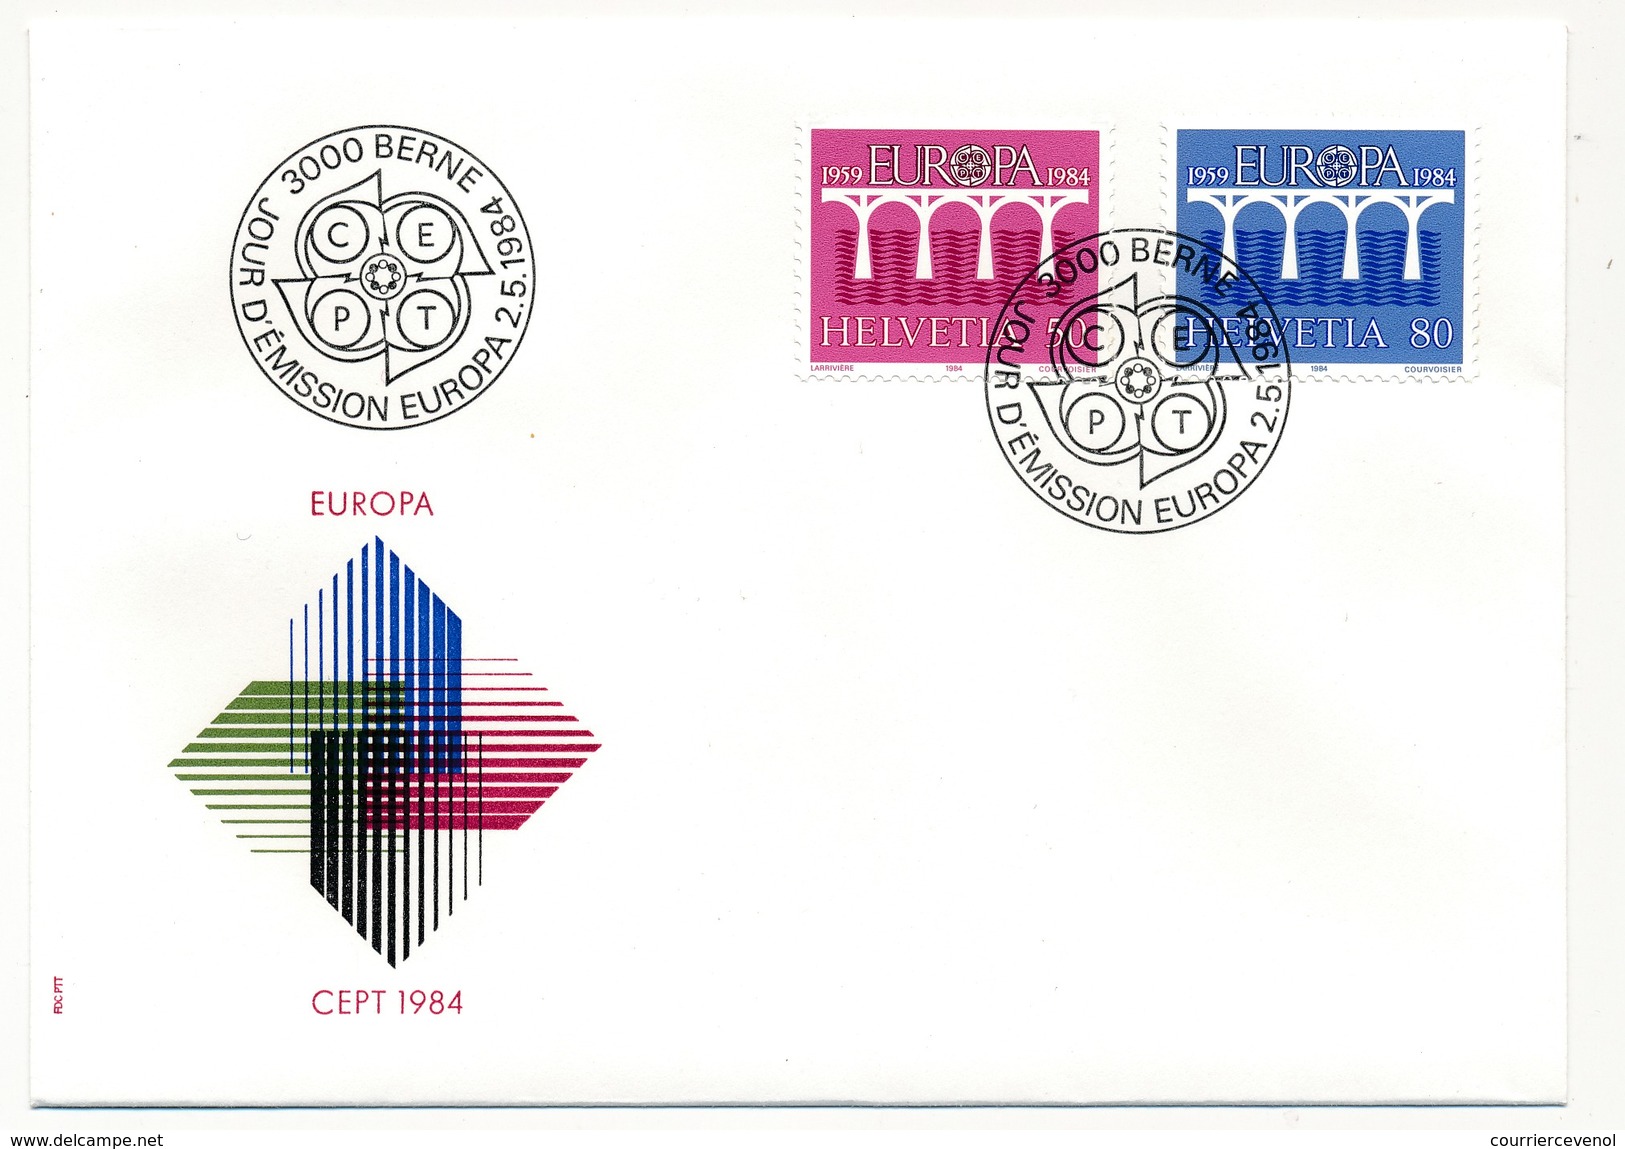 SUISSE - 3 Enveloppes FDC -  EUROPA CEPT 1984 - Bern - 2/05/1984 - FDC